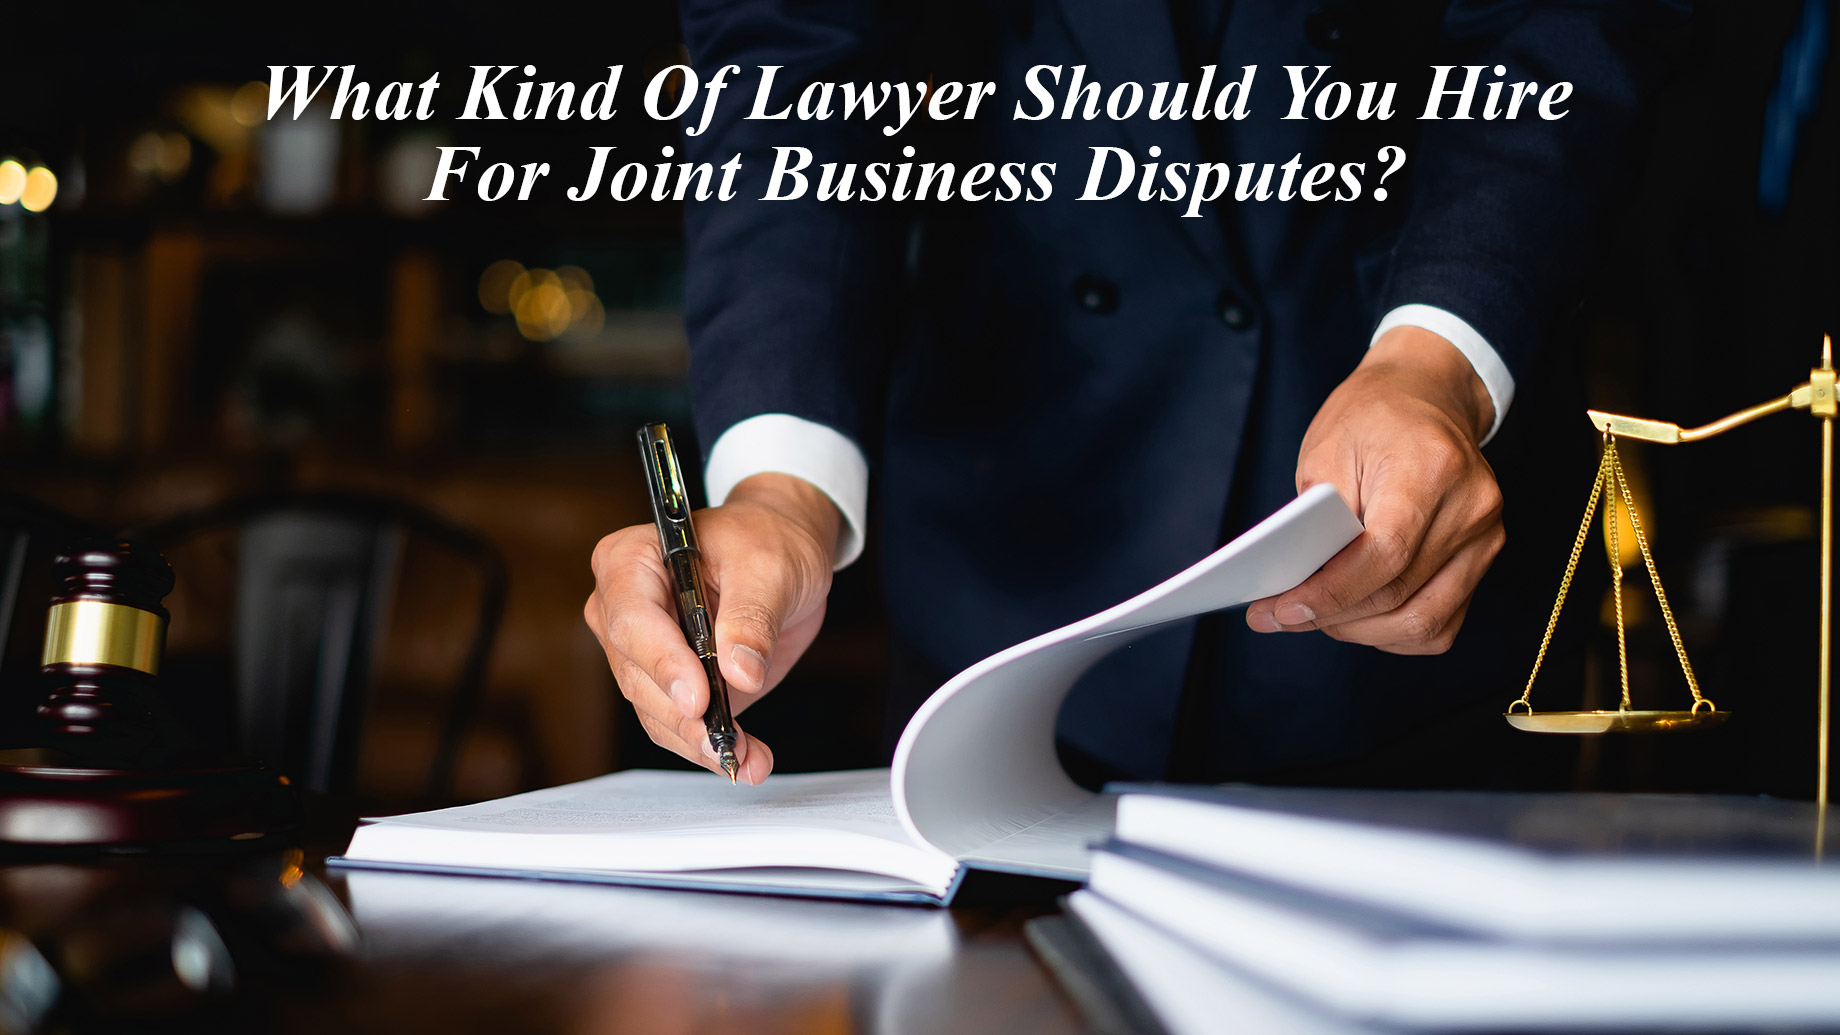 What Kind Of Lawyer Should You Hire For Joint Business Disputes?